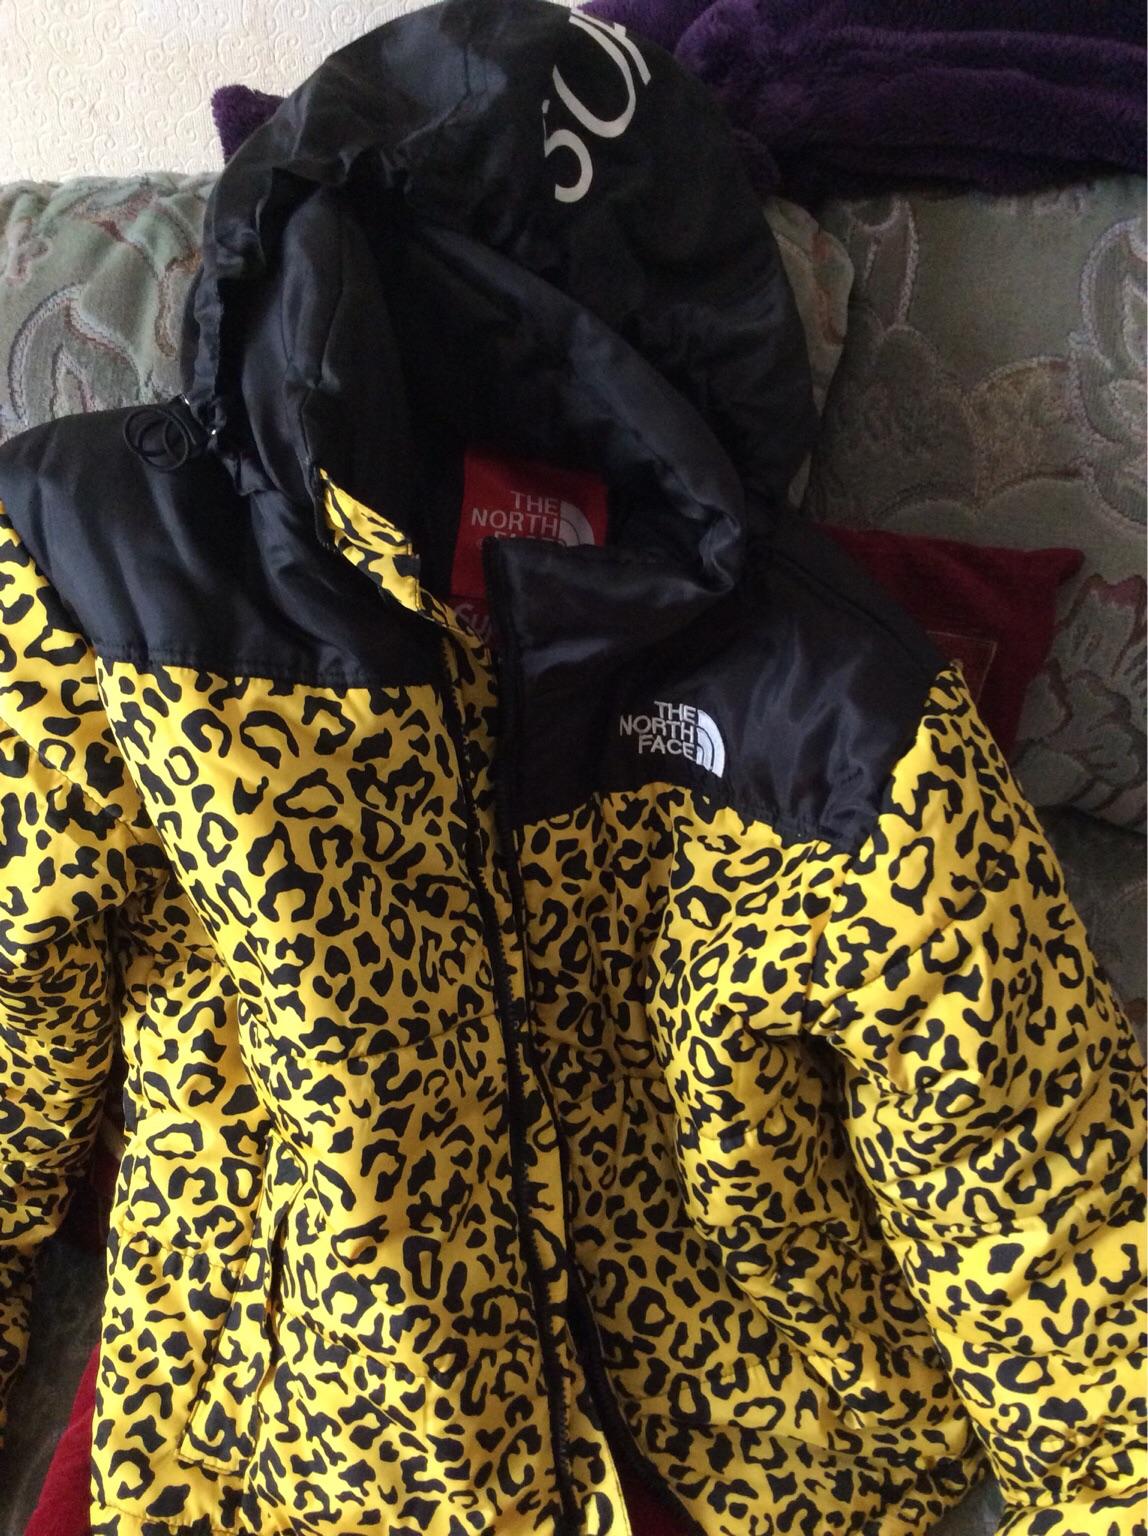 The North Face Supreme Leopard Print Jacket In LL55 Caernarfon For